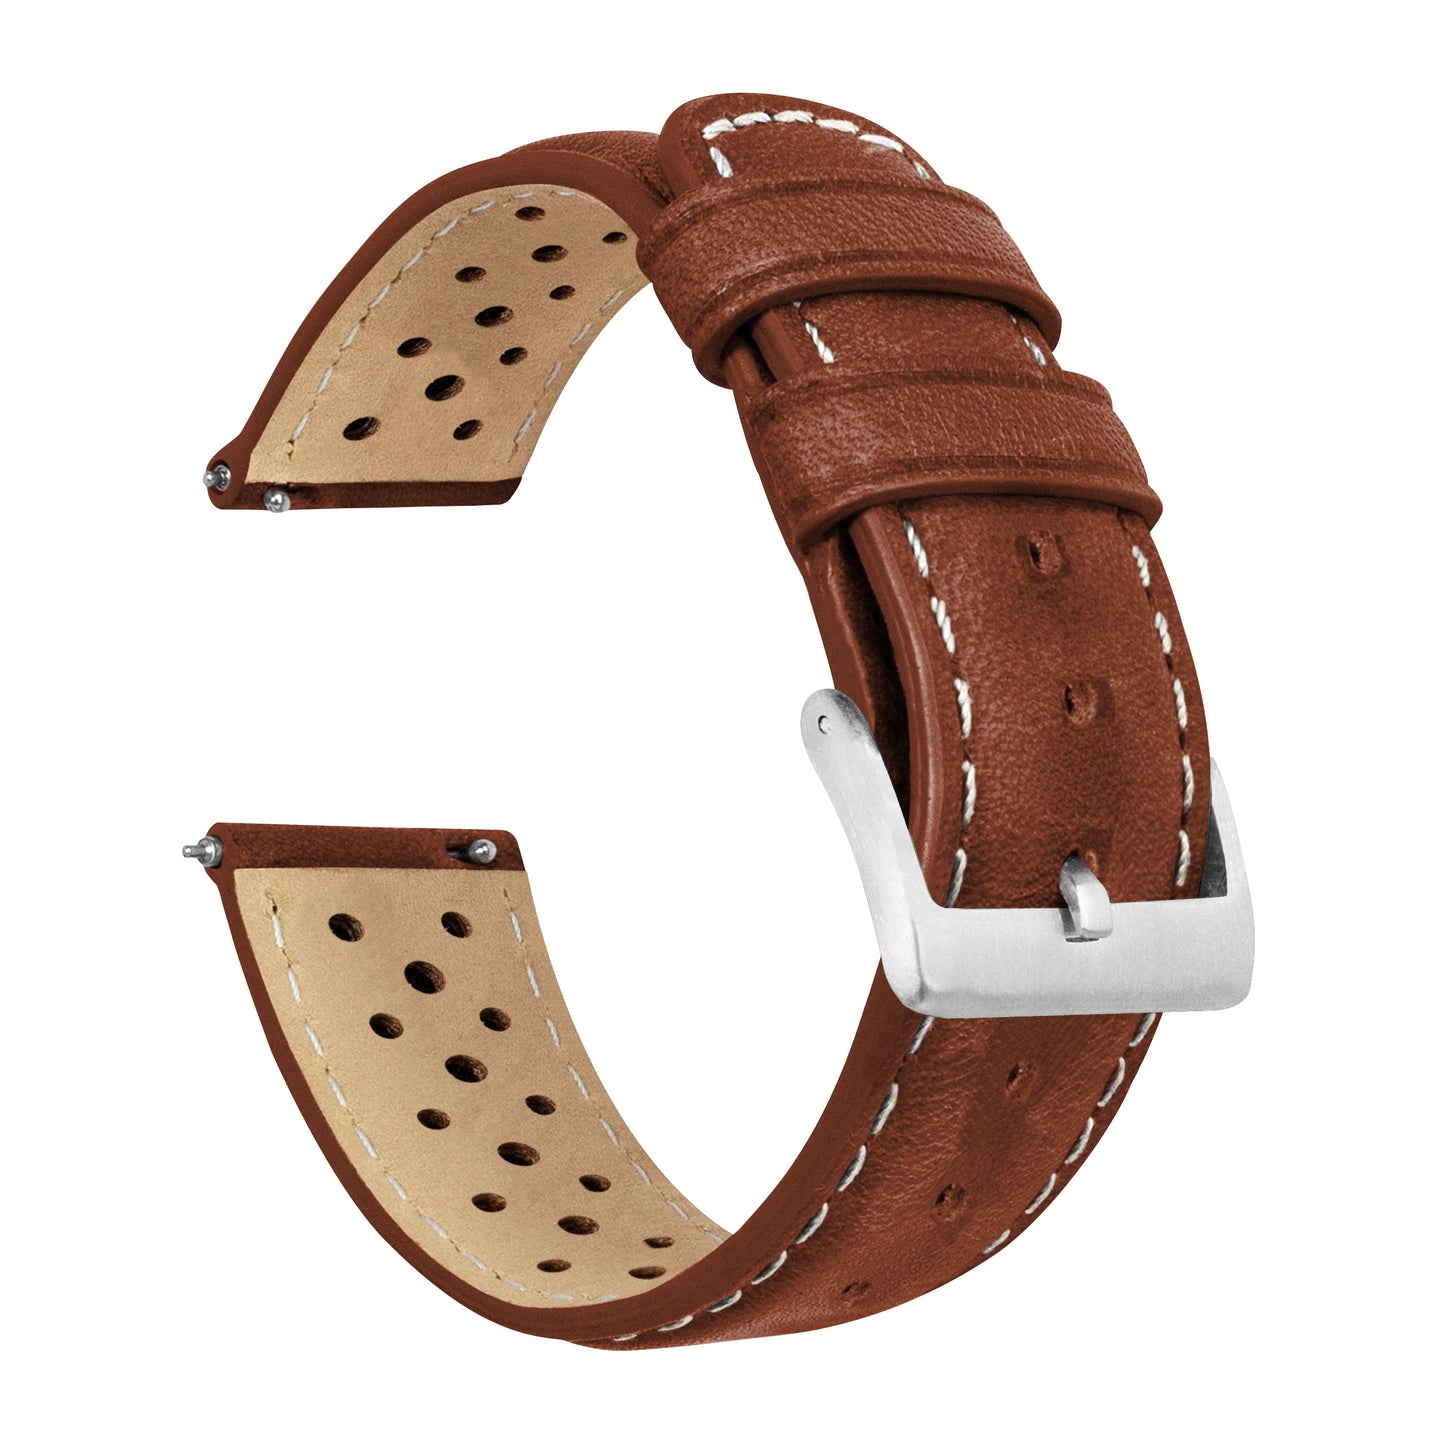 Samsung Galaxy Watch Active 2 Racing Horween Leather Chocolate Brown Linen Stitch Watch Band